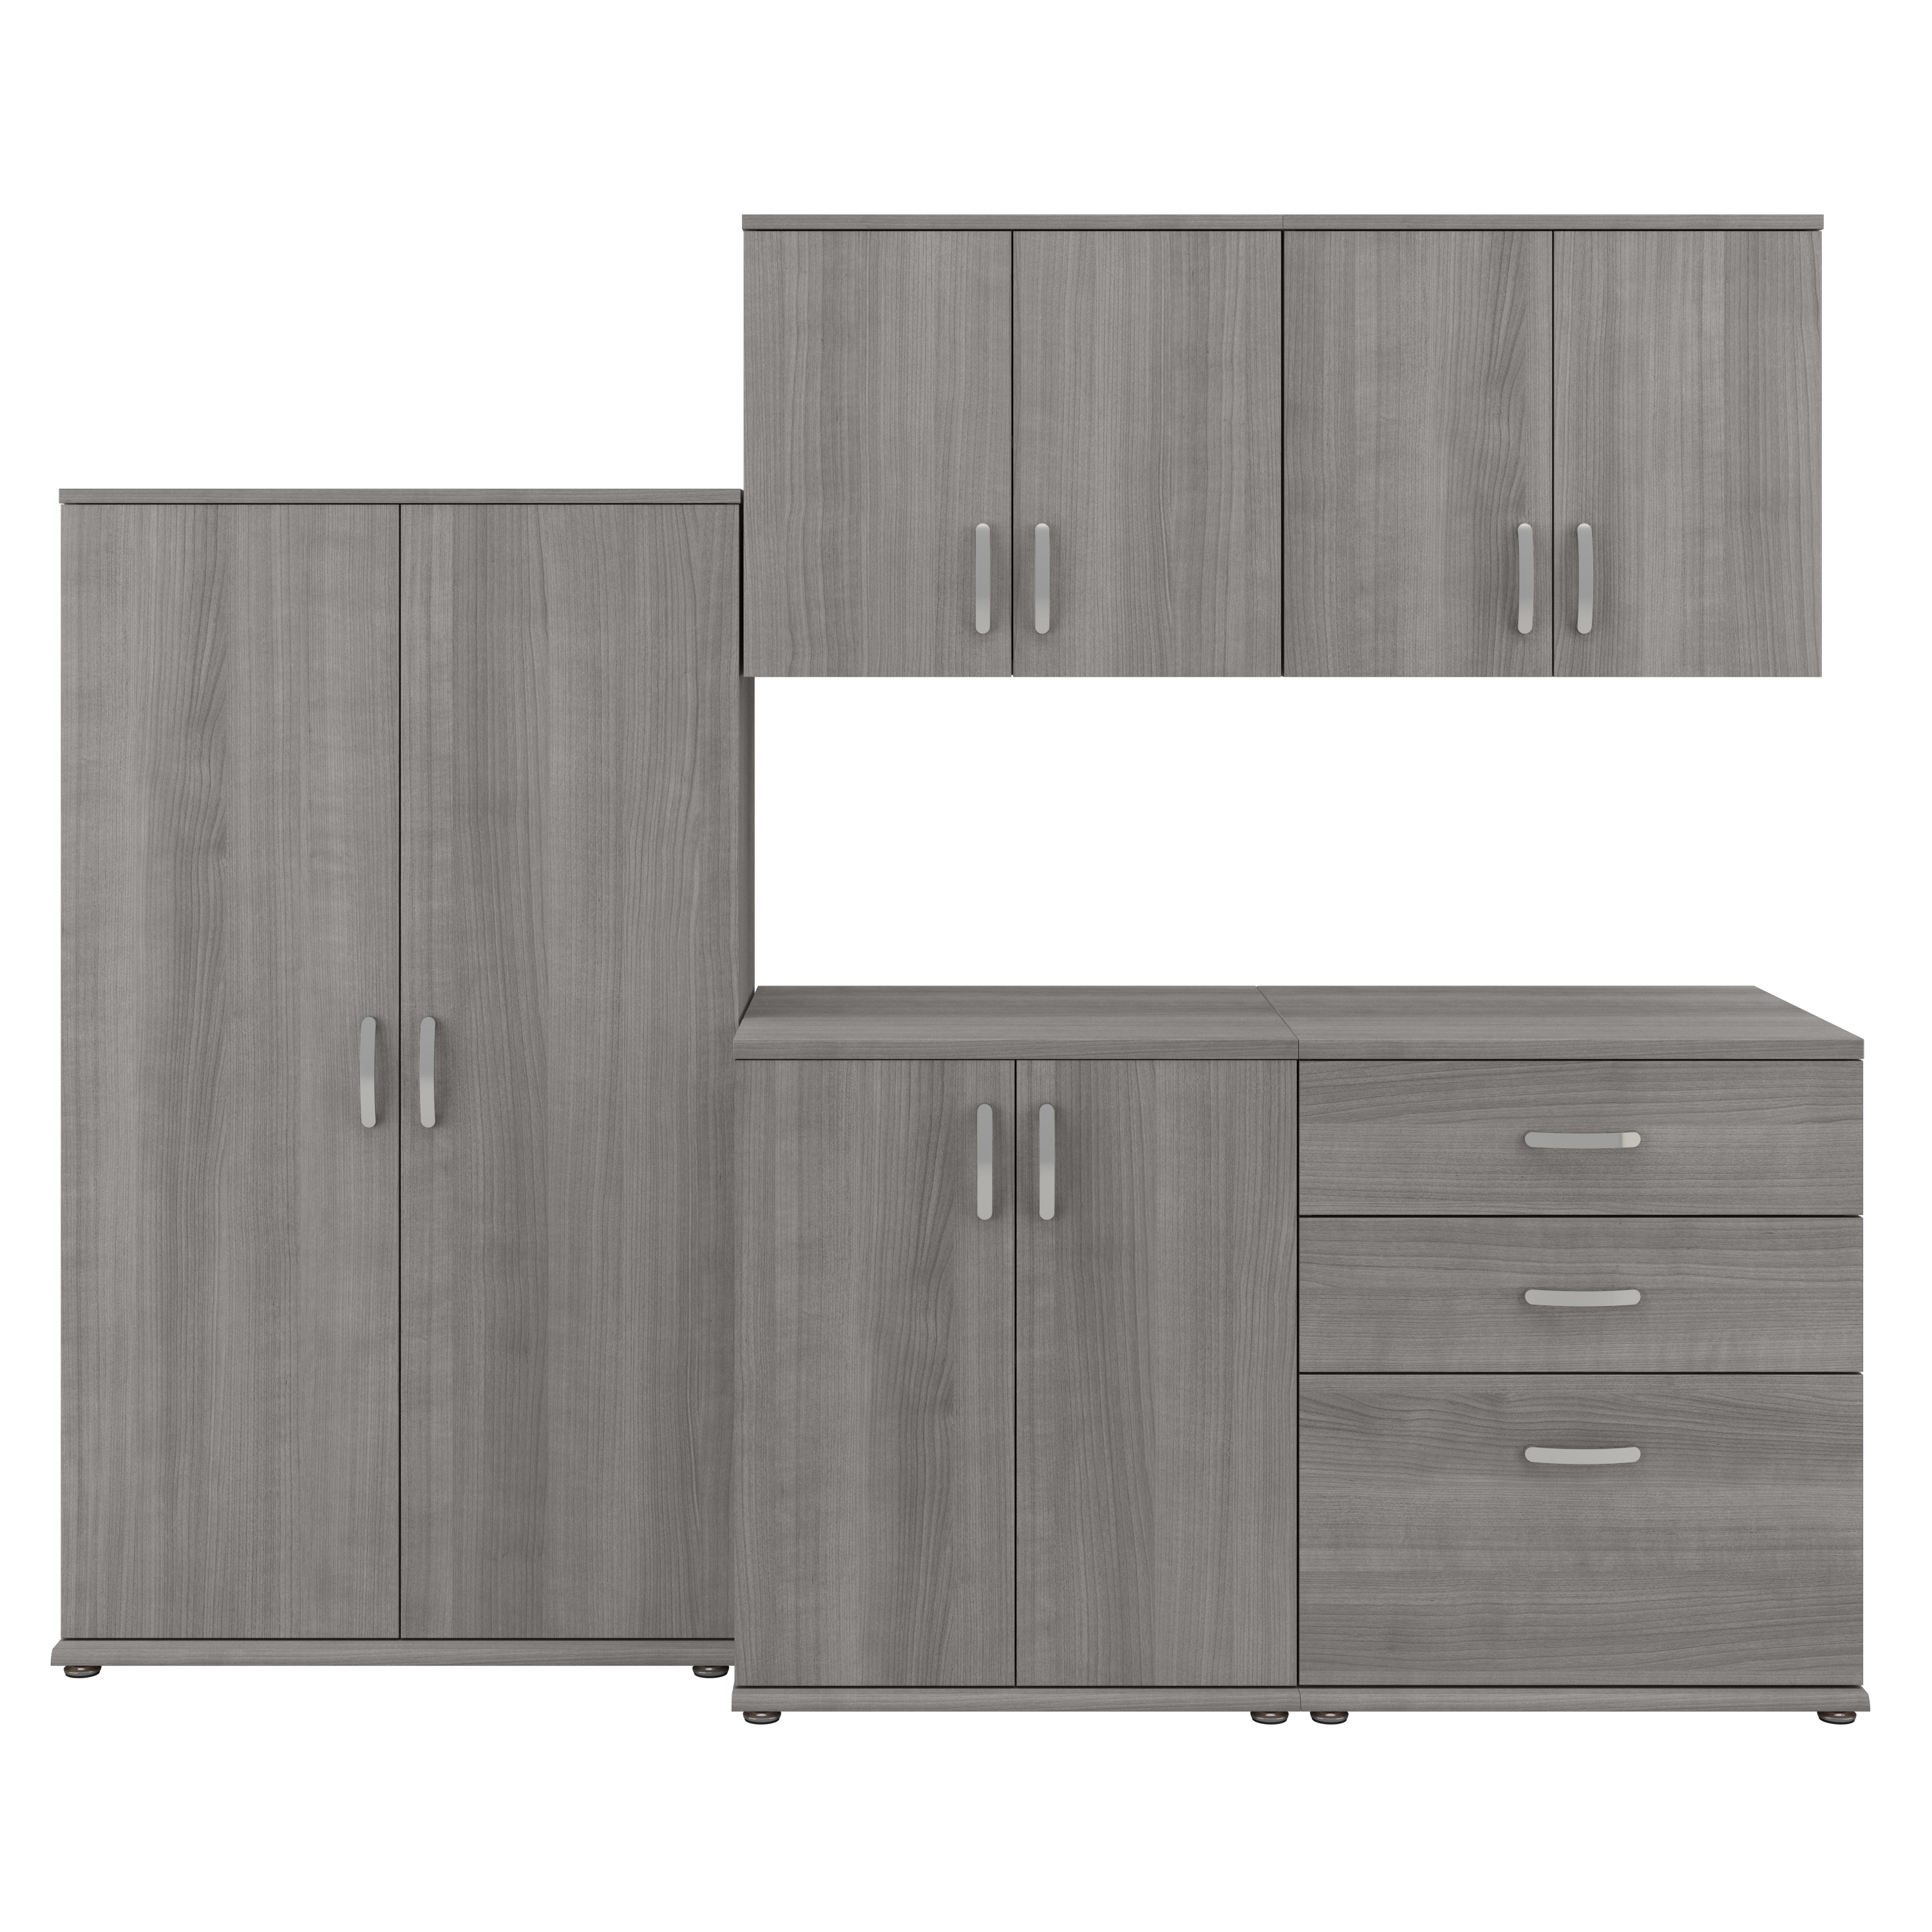 Shop Bush Business Furniture Universal 5 Piece Modular Laundry Room Storage Set with Floor and Wall Cabinets 02 LNS003PG #color_platinum gray